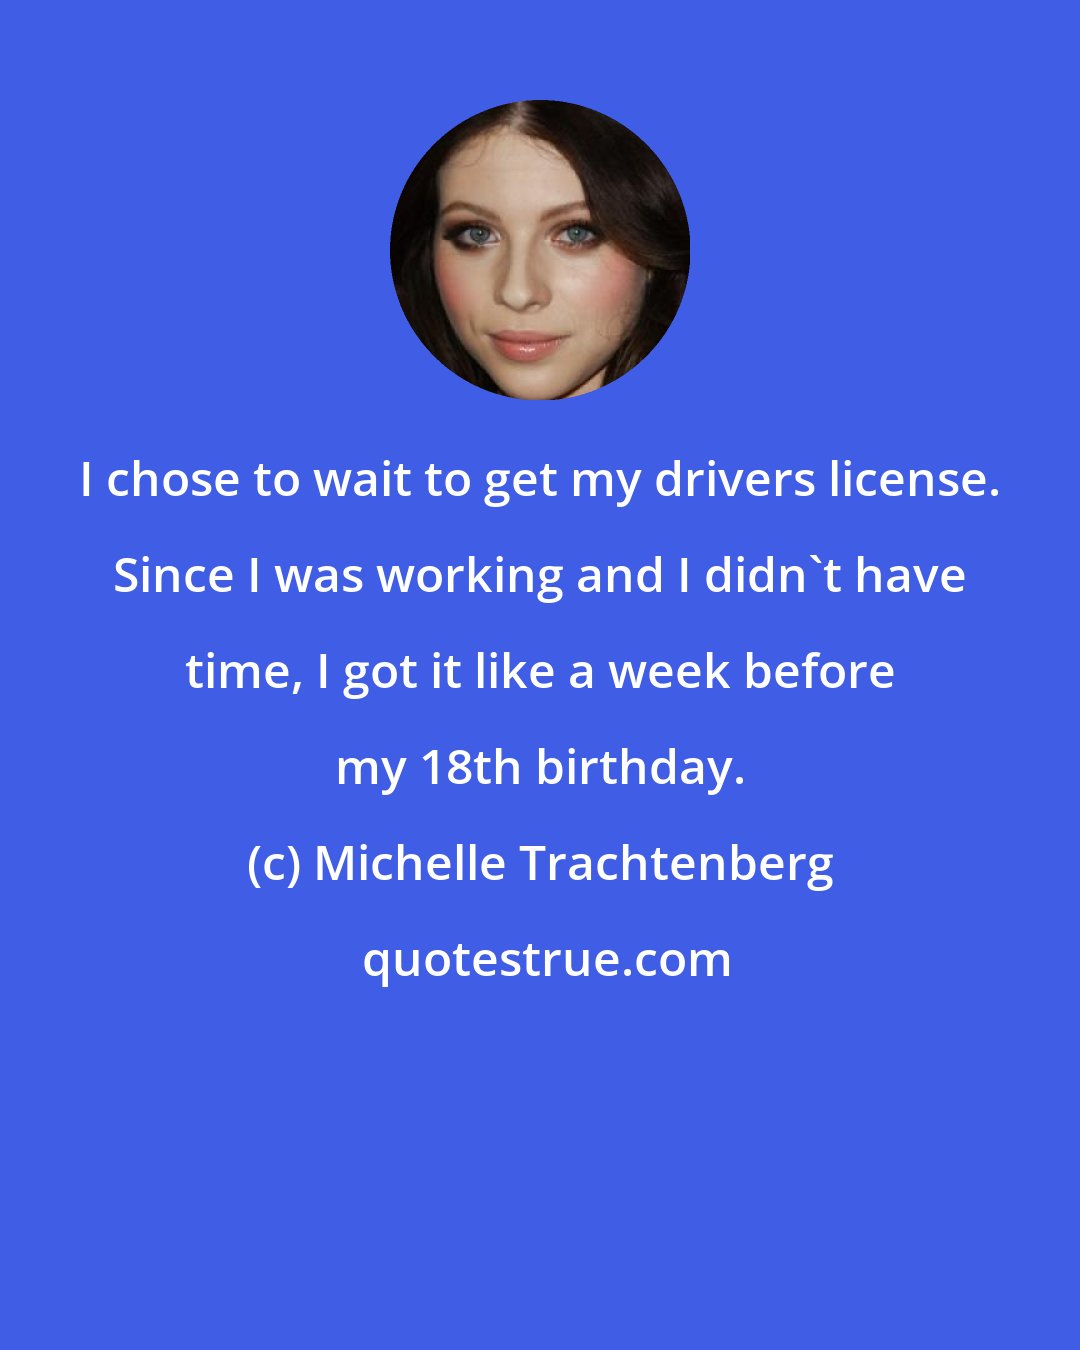 Michelle Trachtenberg: I chose to wait to get my drivers license. Since I was working and I didn't have time, I got it like a week before my 18th birthday.